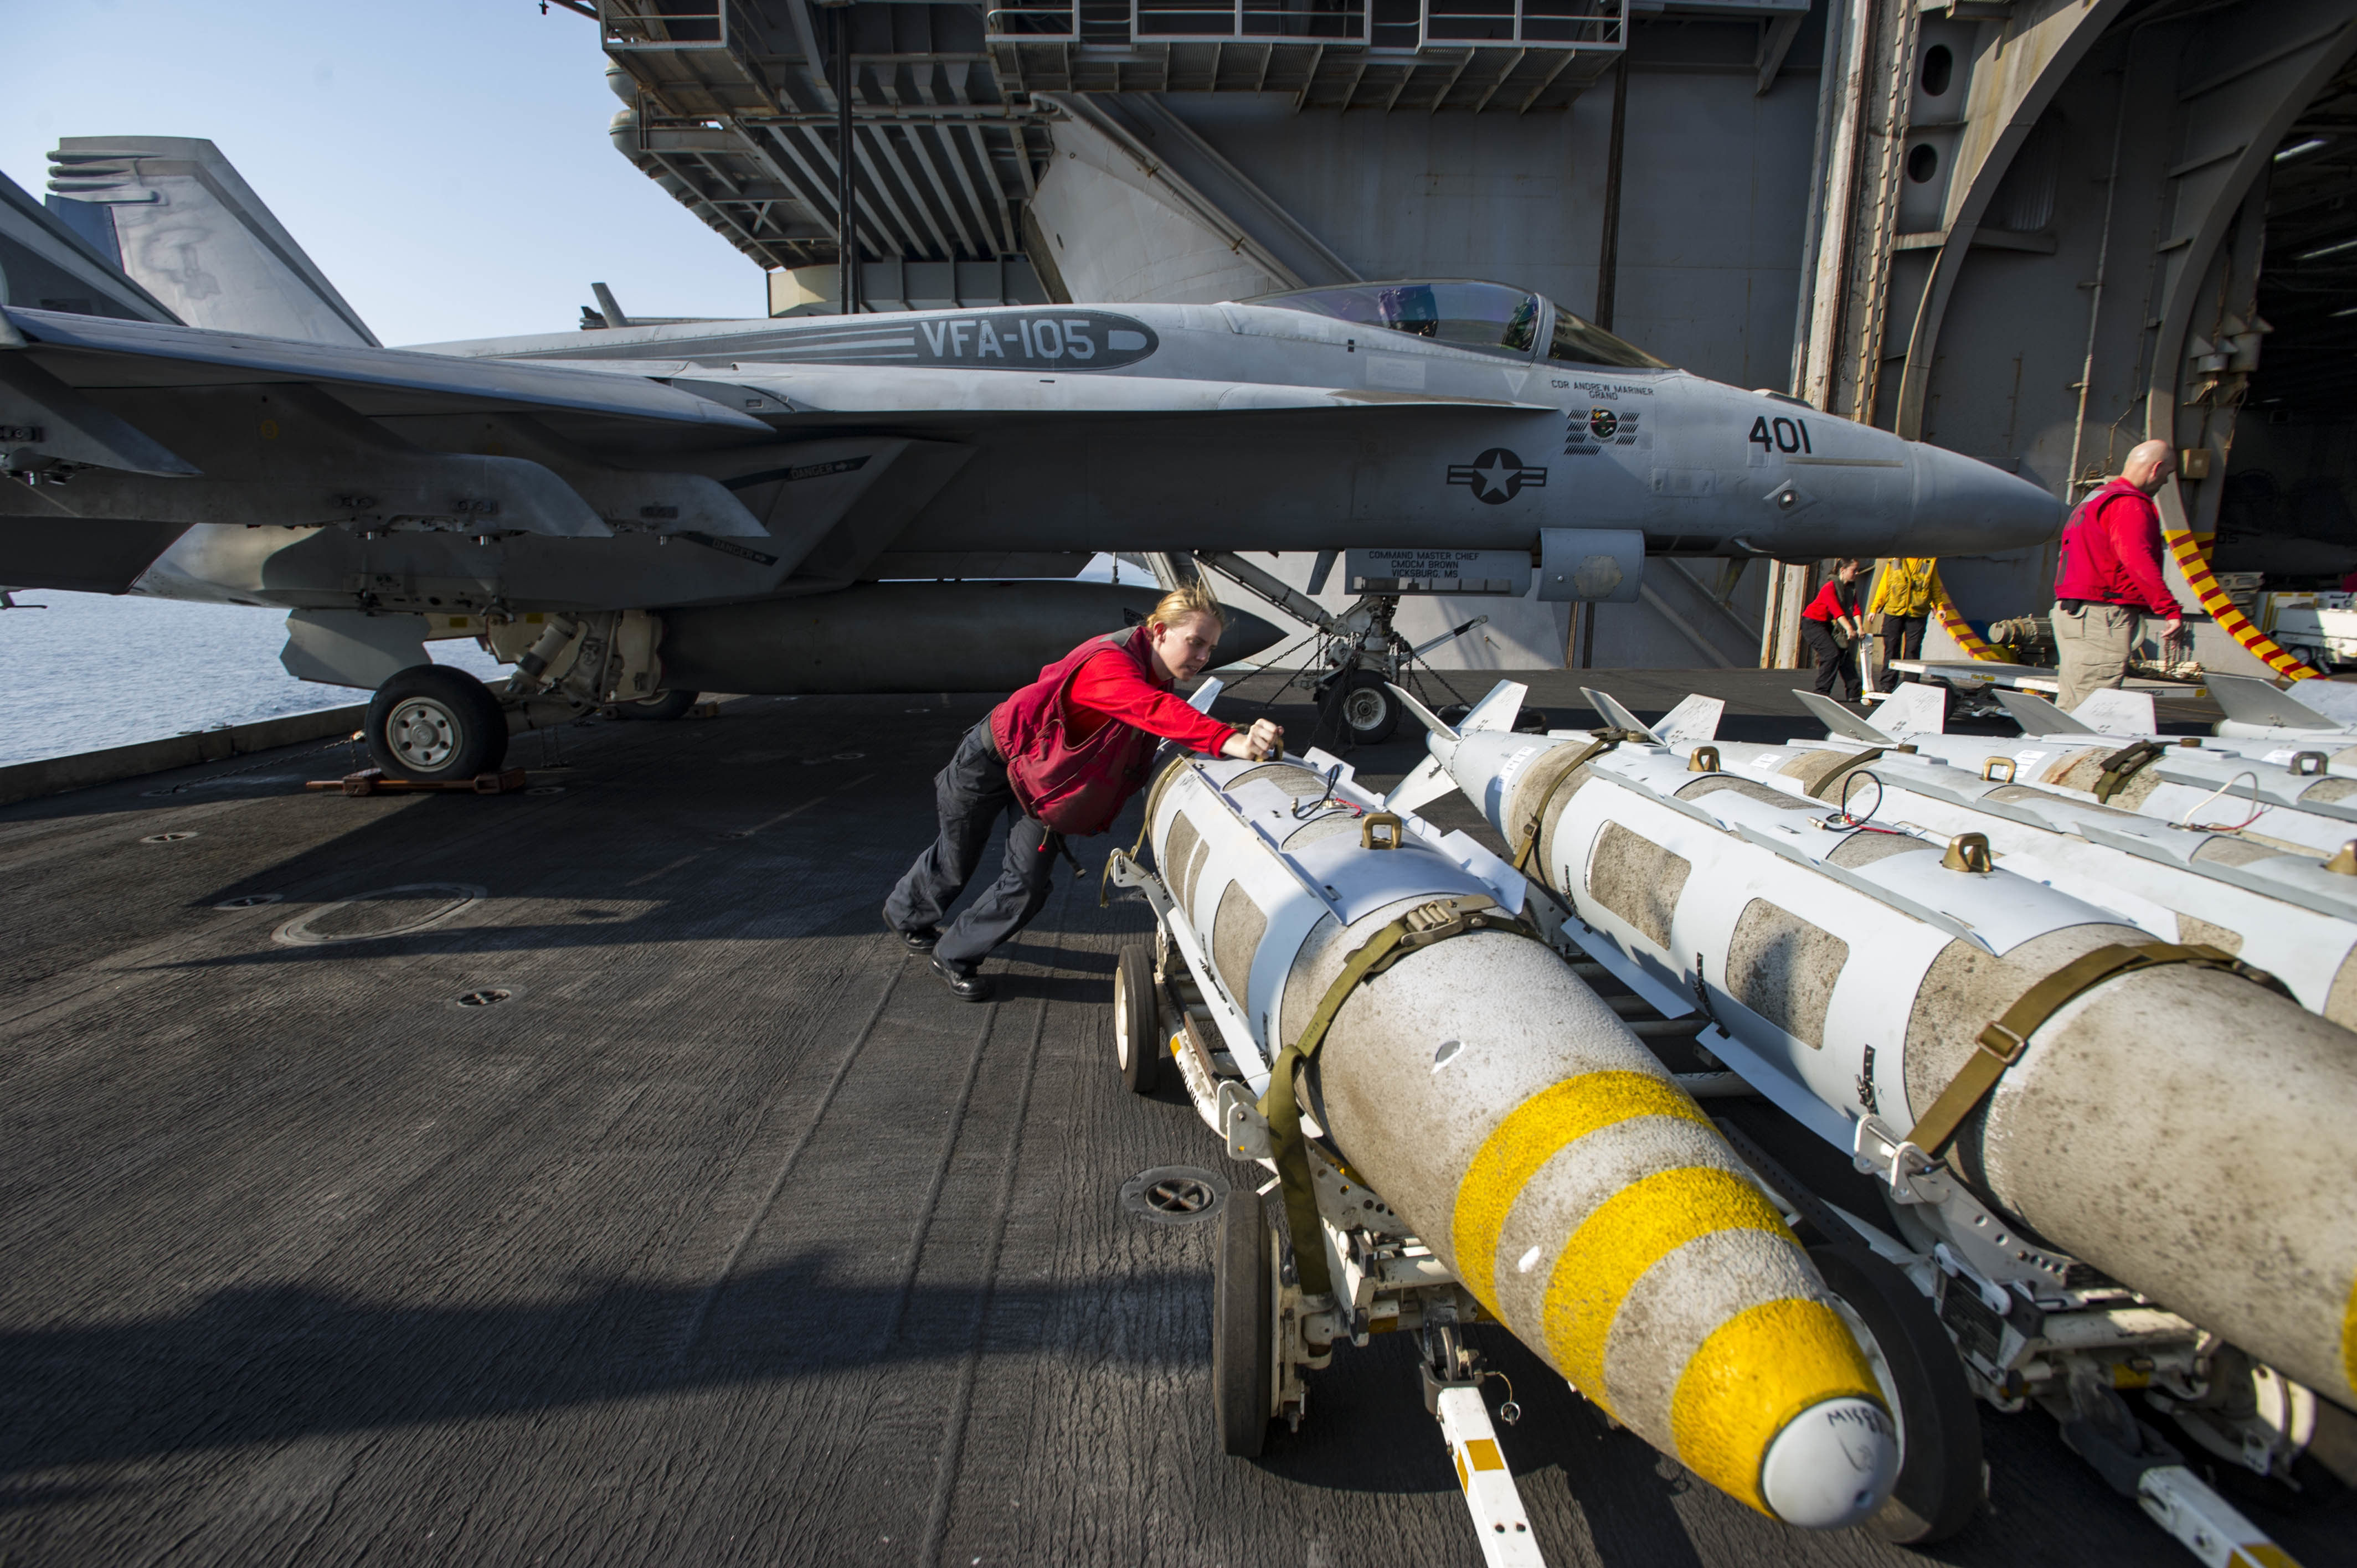 161027-N-WS581-348 ARABIAN GULF (Oct. 27, 2016) Petty Officer 3rd Class Ashley Wilson, from Macon, Mo., pushes a GBU31 bomb onto an aircraft elevator aboard the aircraft carrier USS Dwight D. Eisenhower (CVN 69) (Ike). Wilson serves aboard Ike as an aviation ordnanceman and is responsible for assembling and maintaining ordnance for the ship. Ike and its Carrier Strike Group are deployed in support of Operation Inherent Resolve, maritime security operations and theater security cooperation efforts in the U.S. 5th Fleet area of operations. (U.S. Navy photo by Petty Officer 3rd Class Andrew J. Sneeringer)